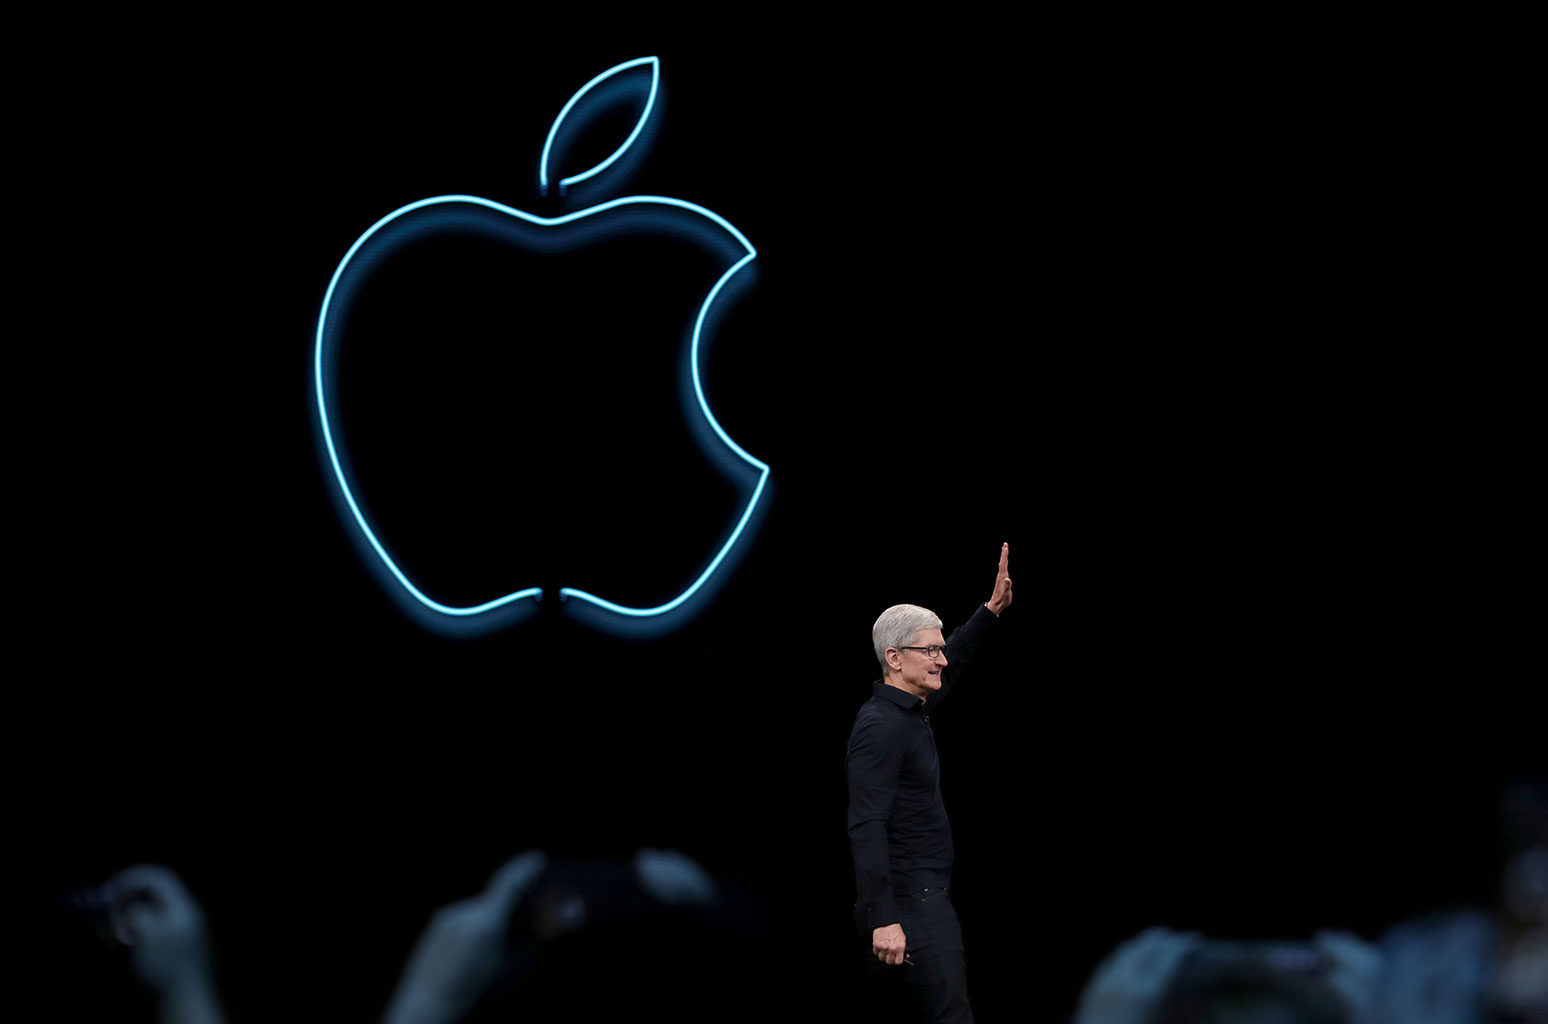 2019 Apple Wwdc Is Underway And Here Are The Major Highlights So Far